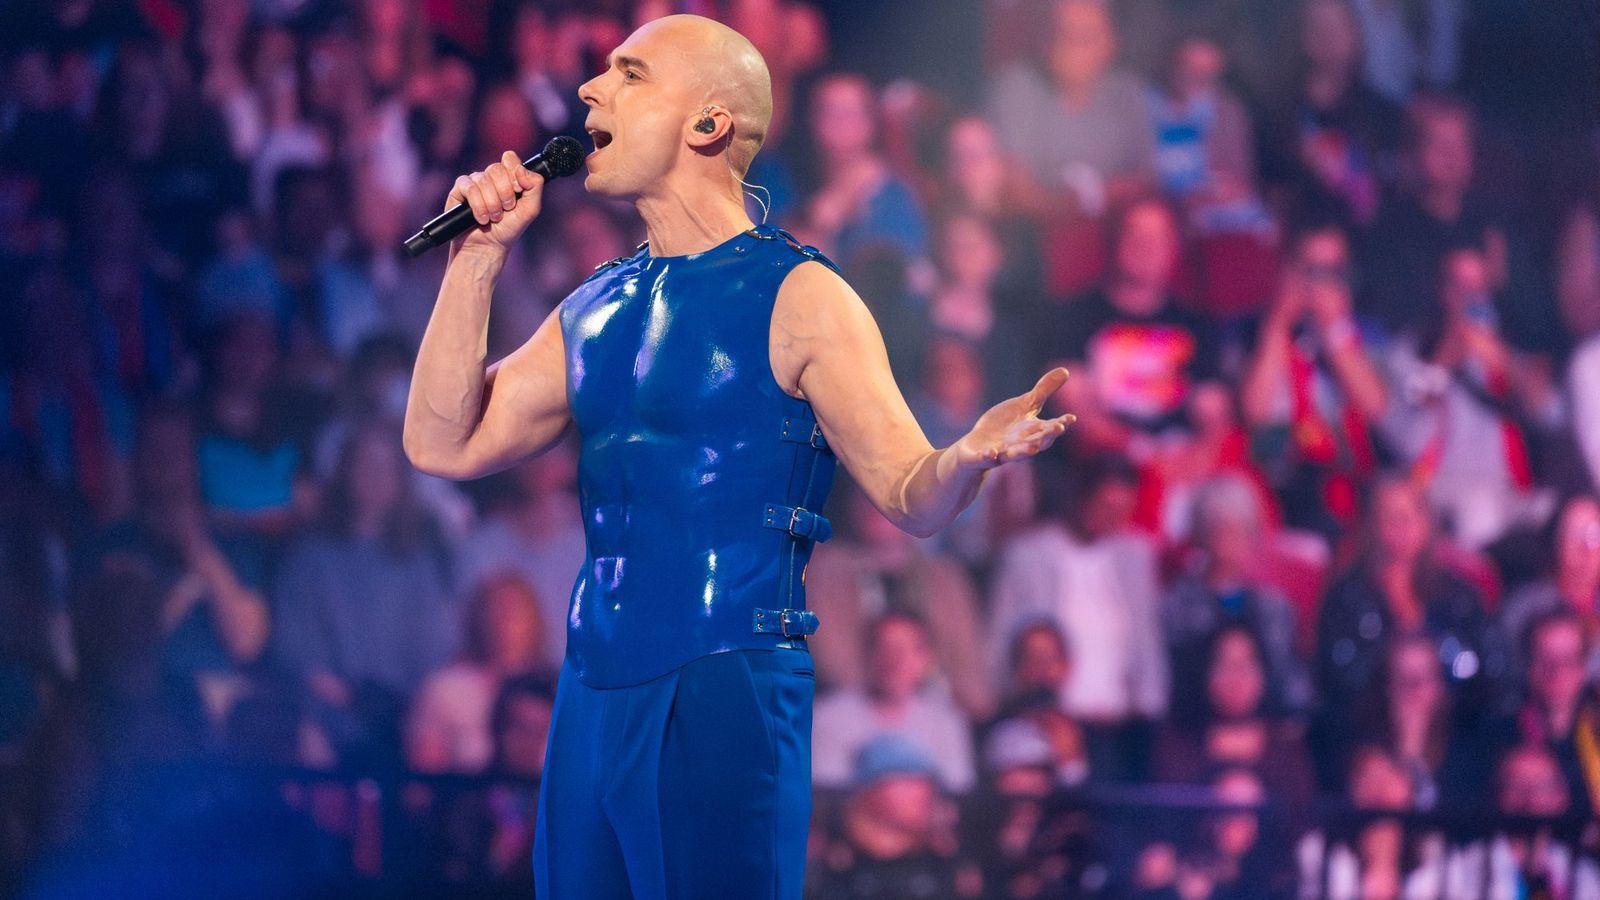 politics pushes its way into eurovision as final acts announced ahead of showpiece